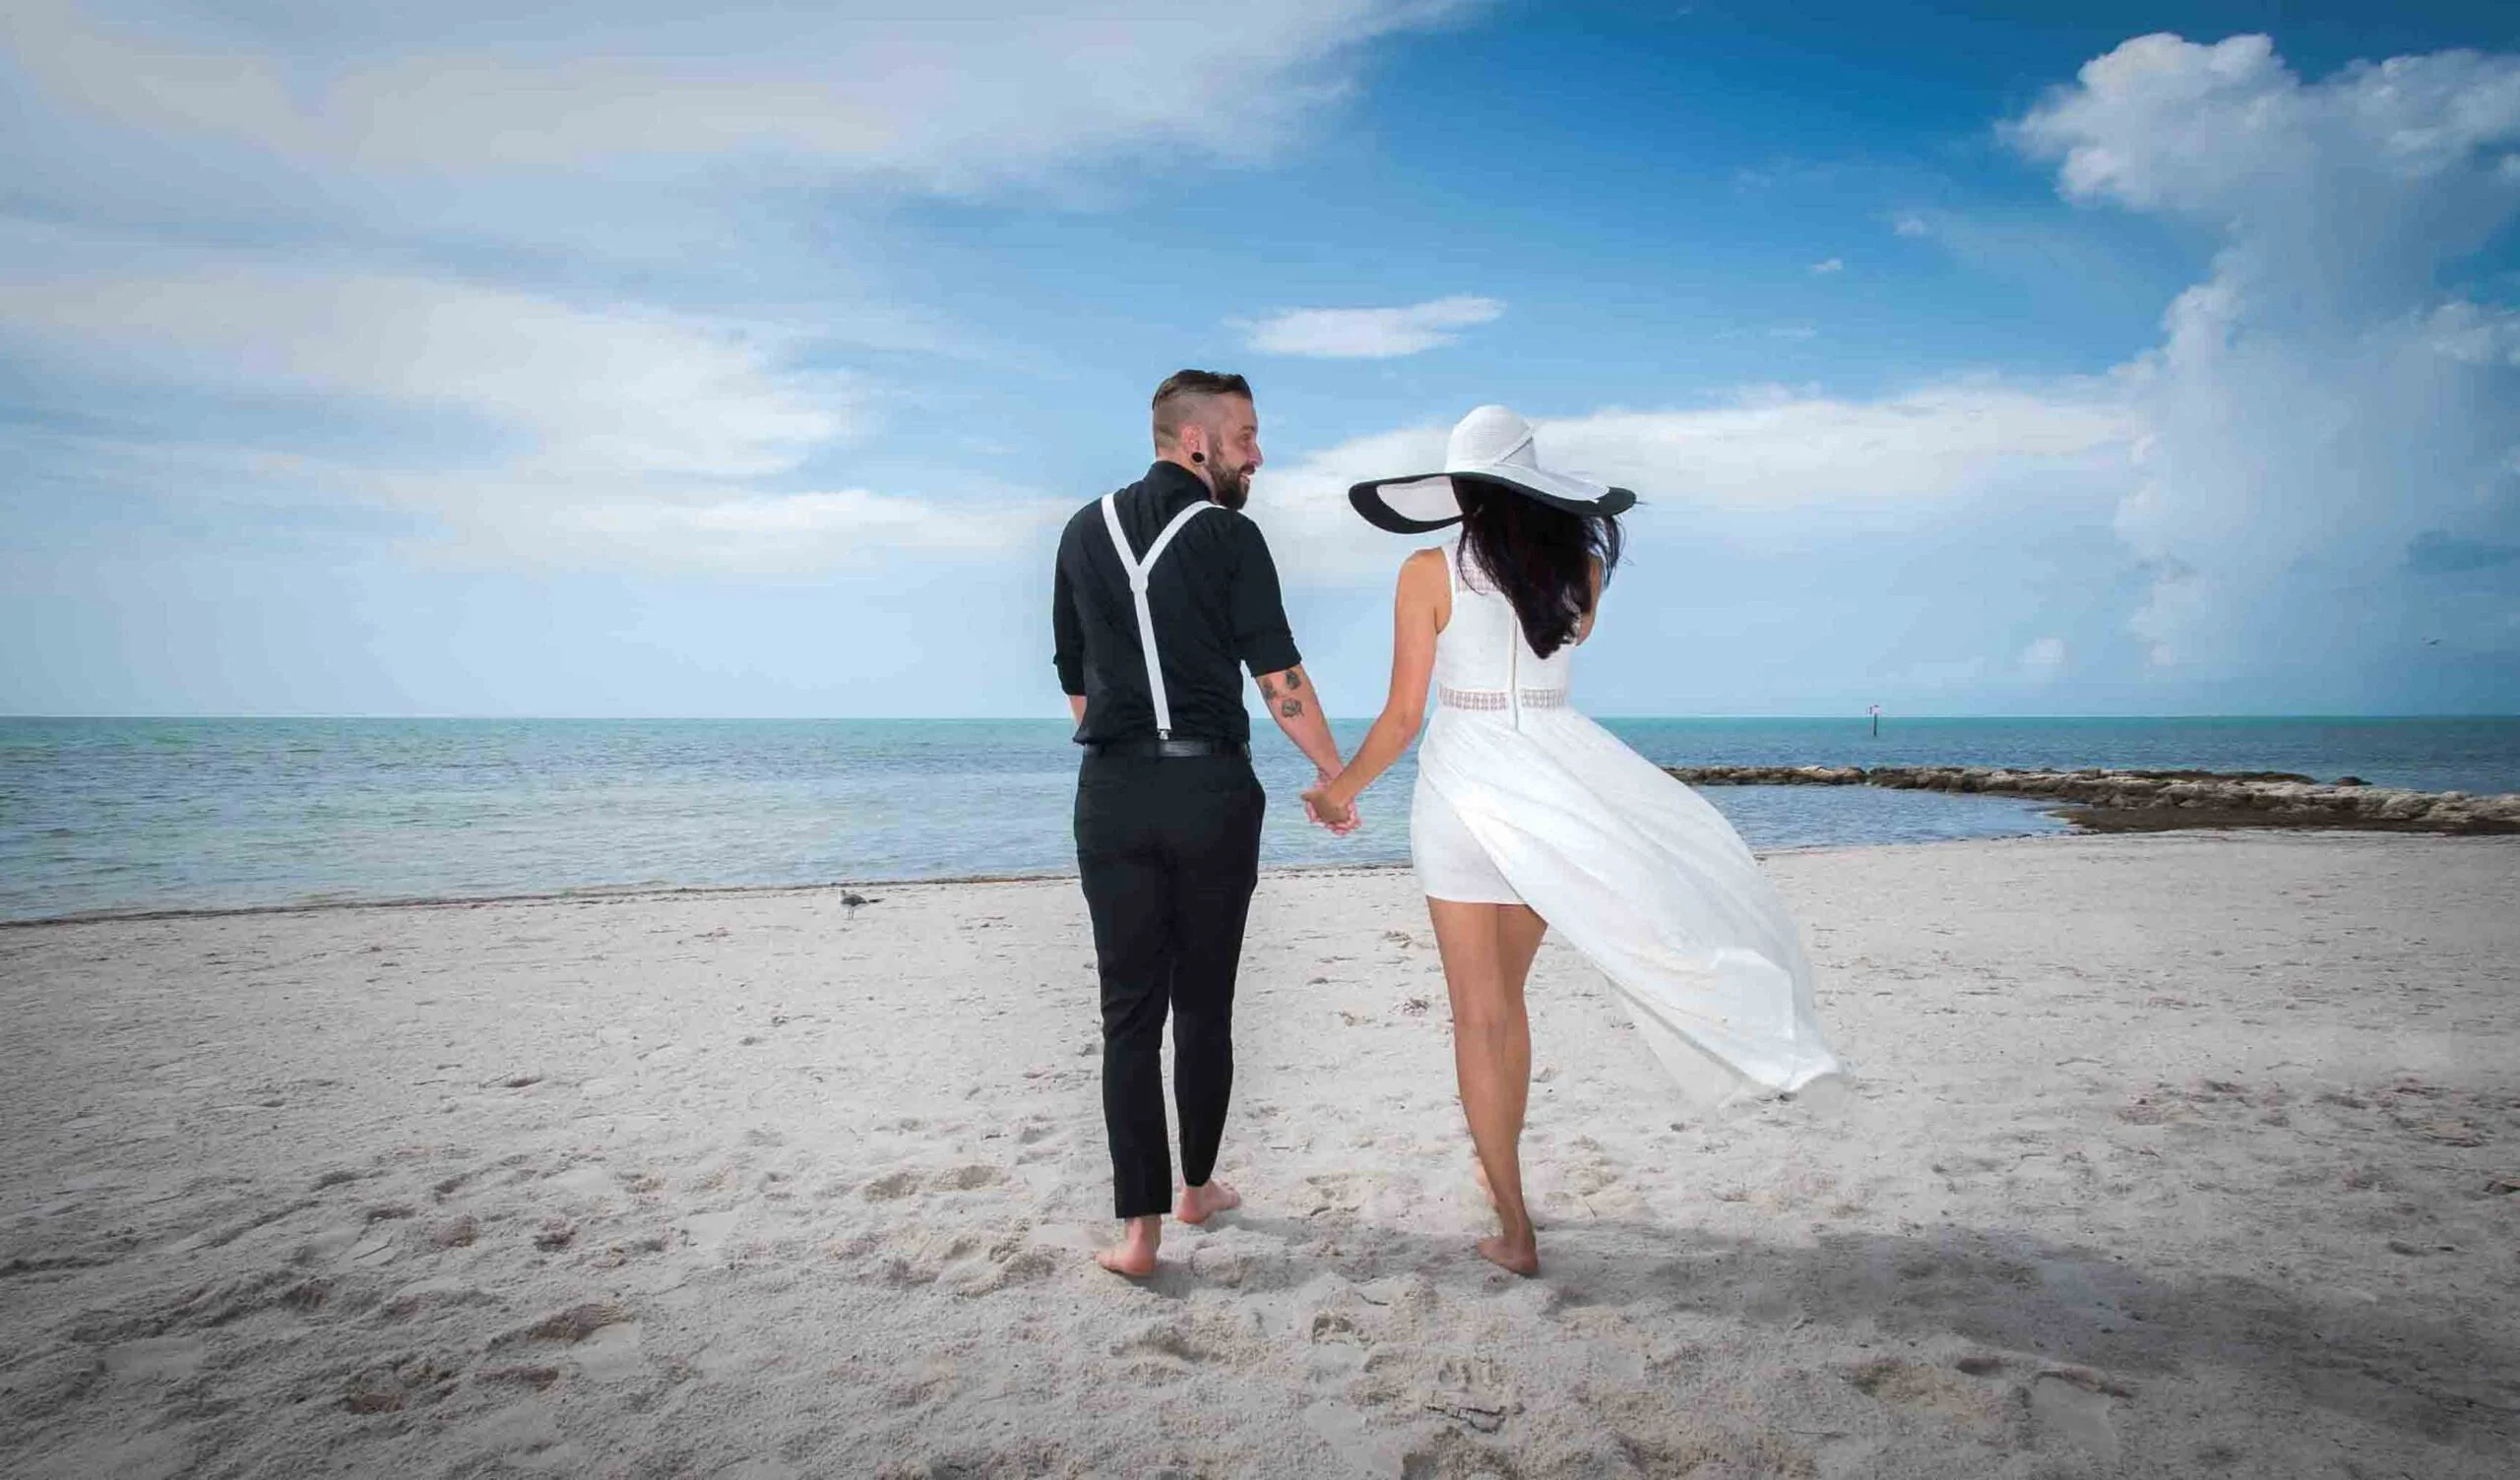 Keywords used: key west wedding photographer, key west weddingDescription: A beautiful key west wedding captured by a talented photographer. The bride and groom are seen holding hands on the serene beach, with the